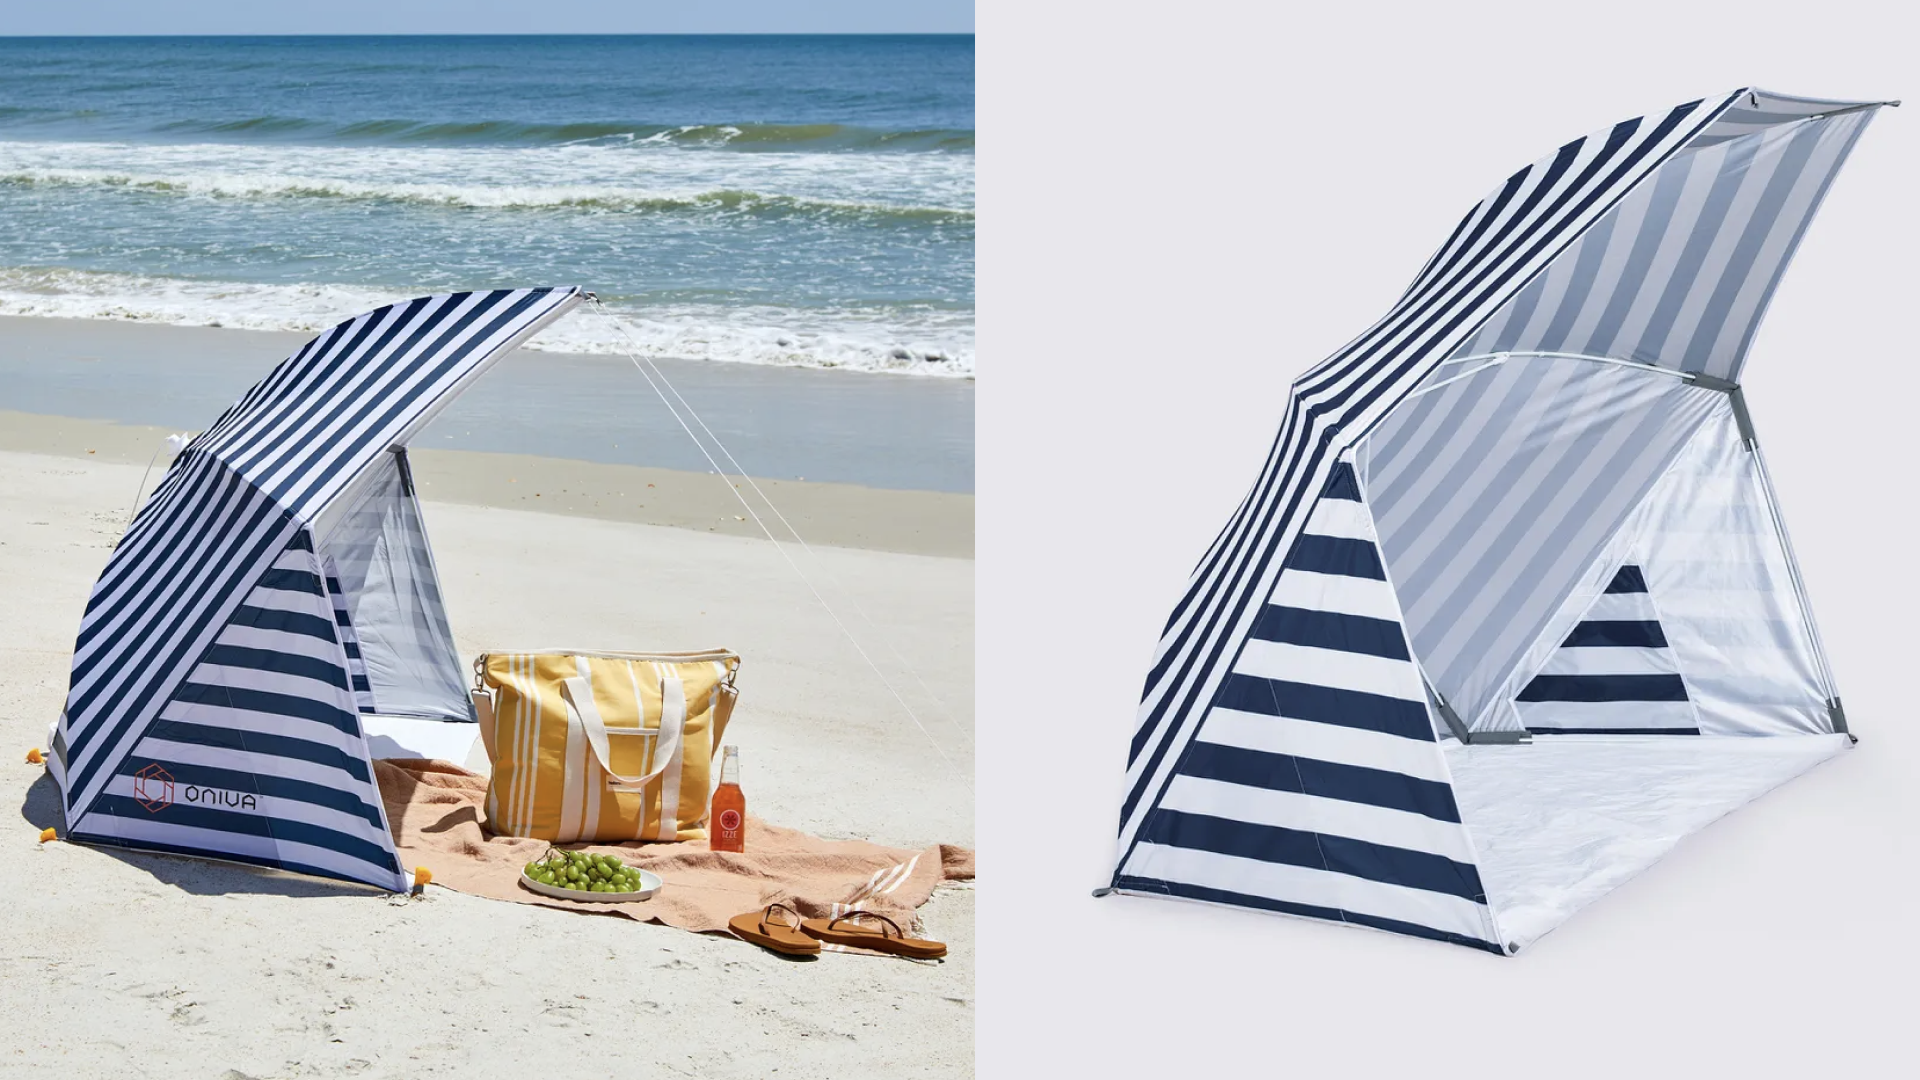 umbrella tent for shade while outside